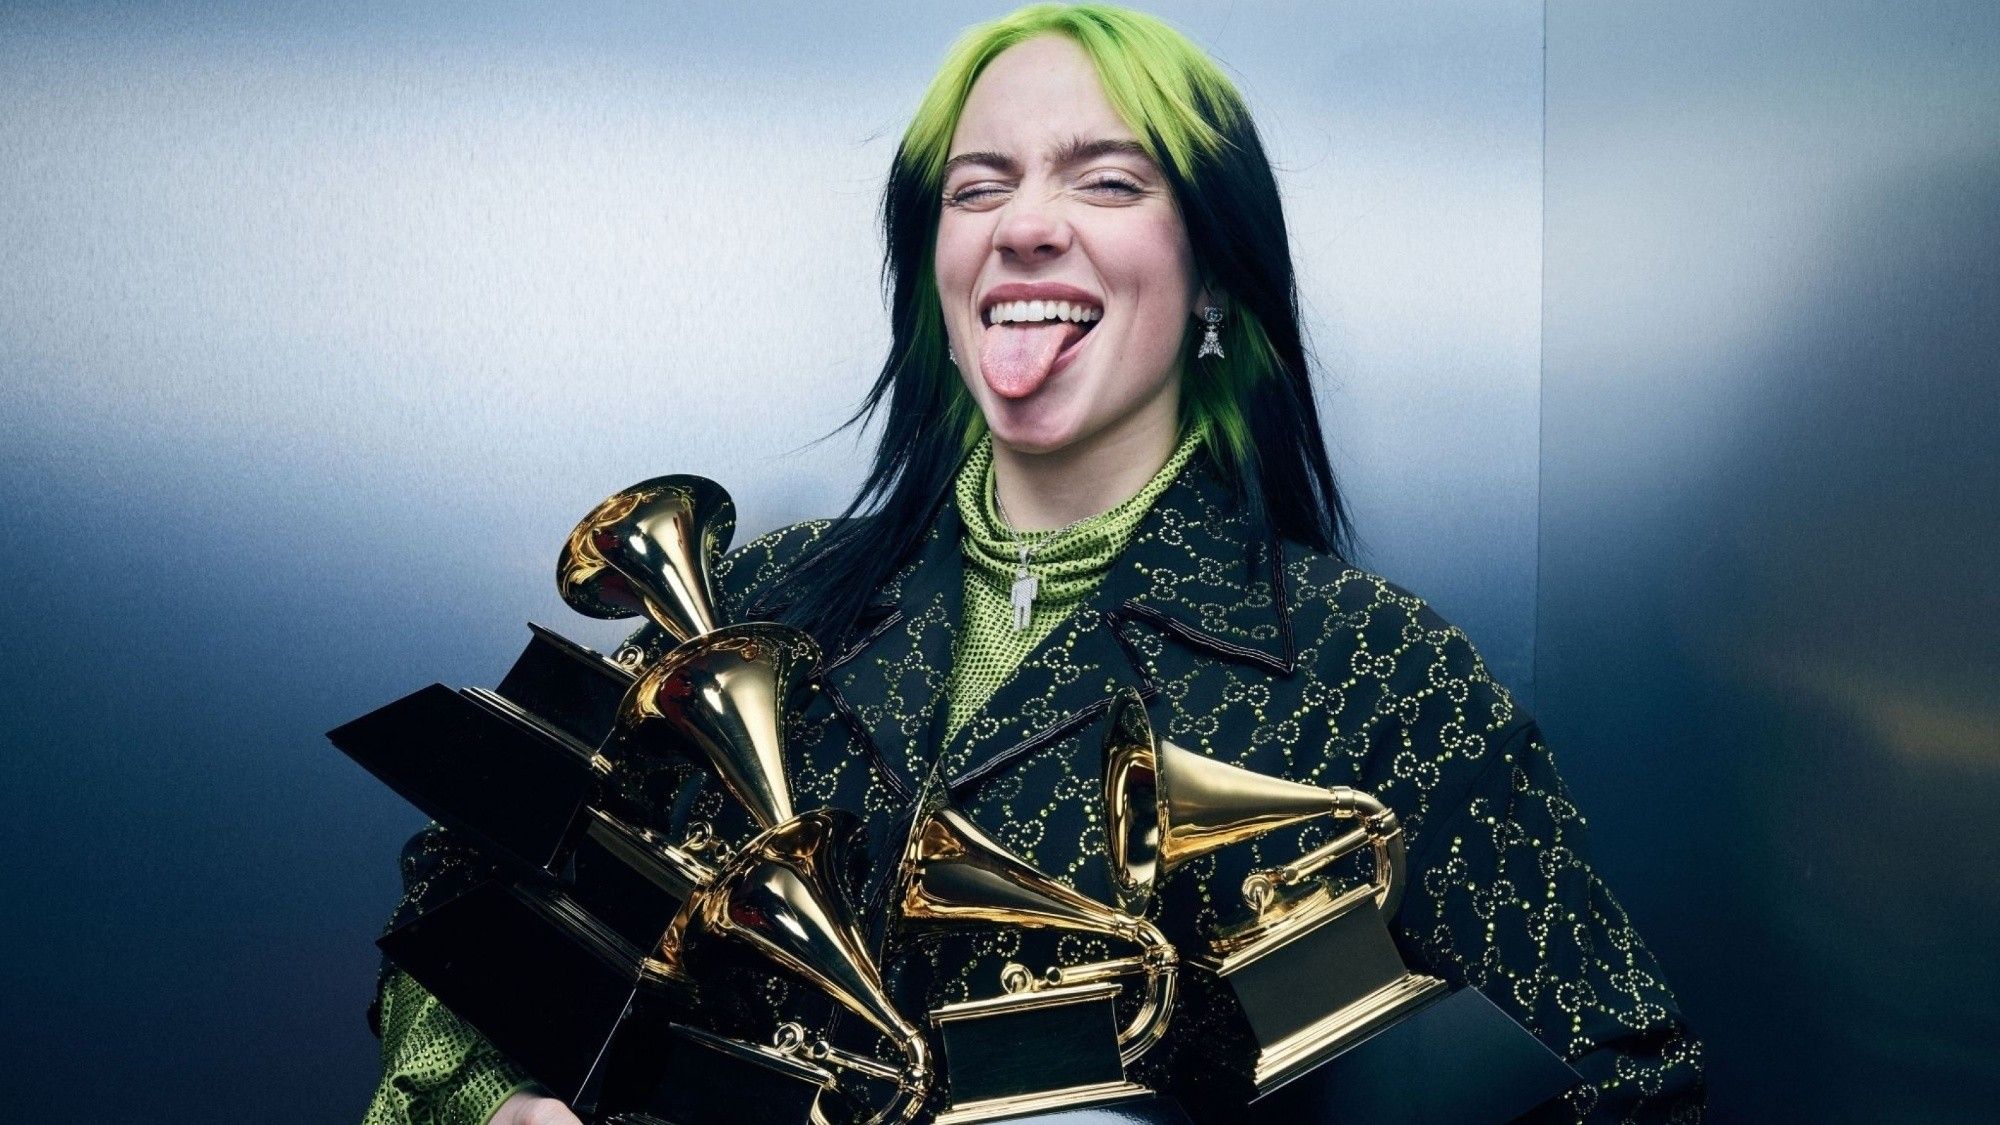 fascinating facts about Billie Eilish you should know!